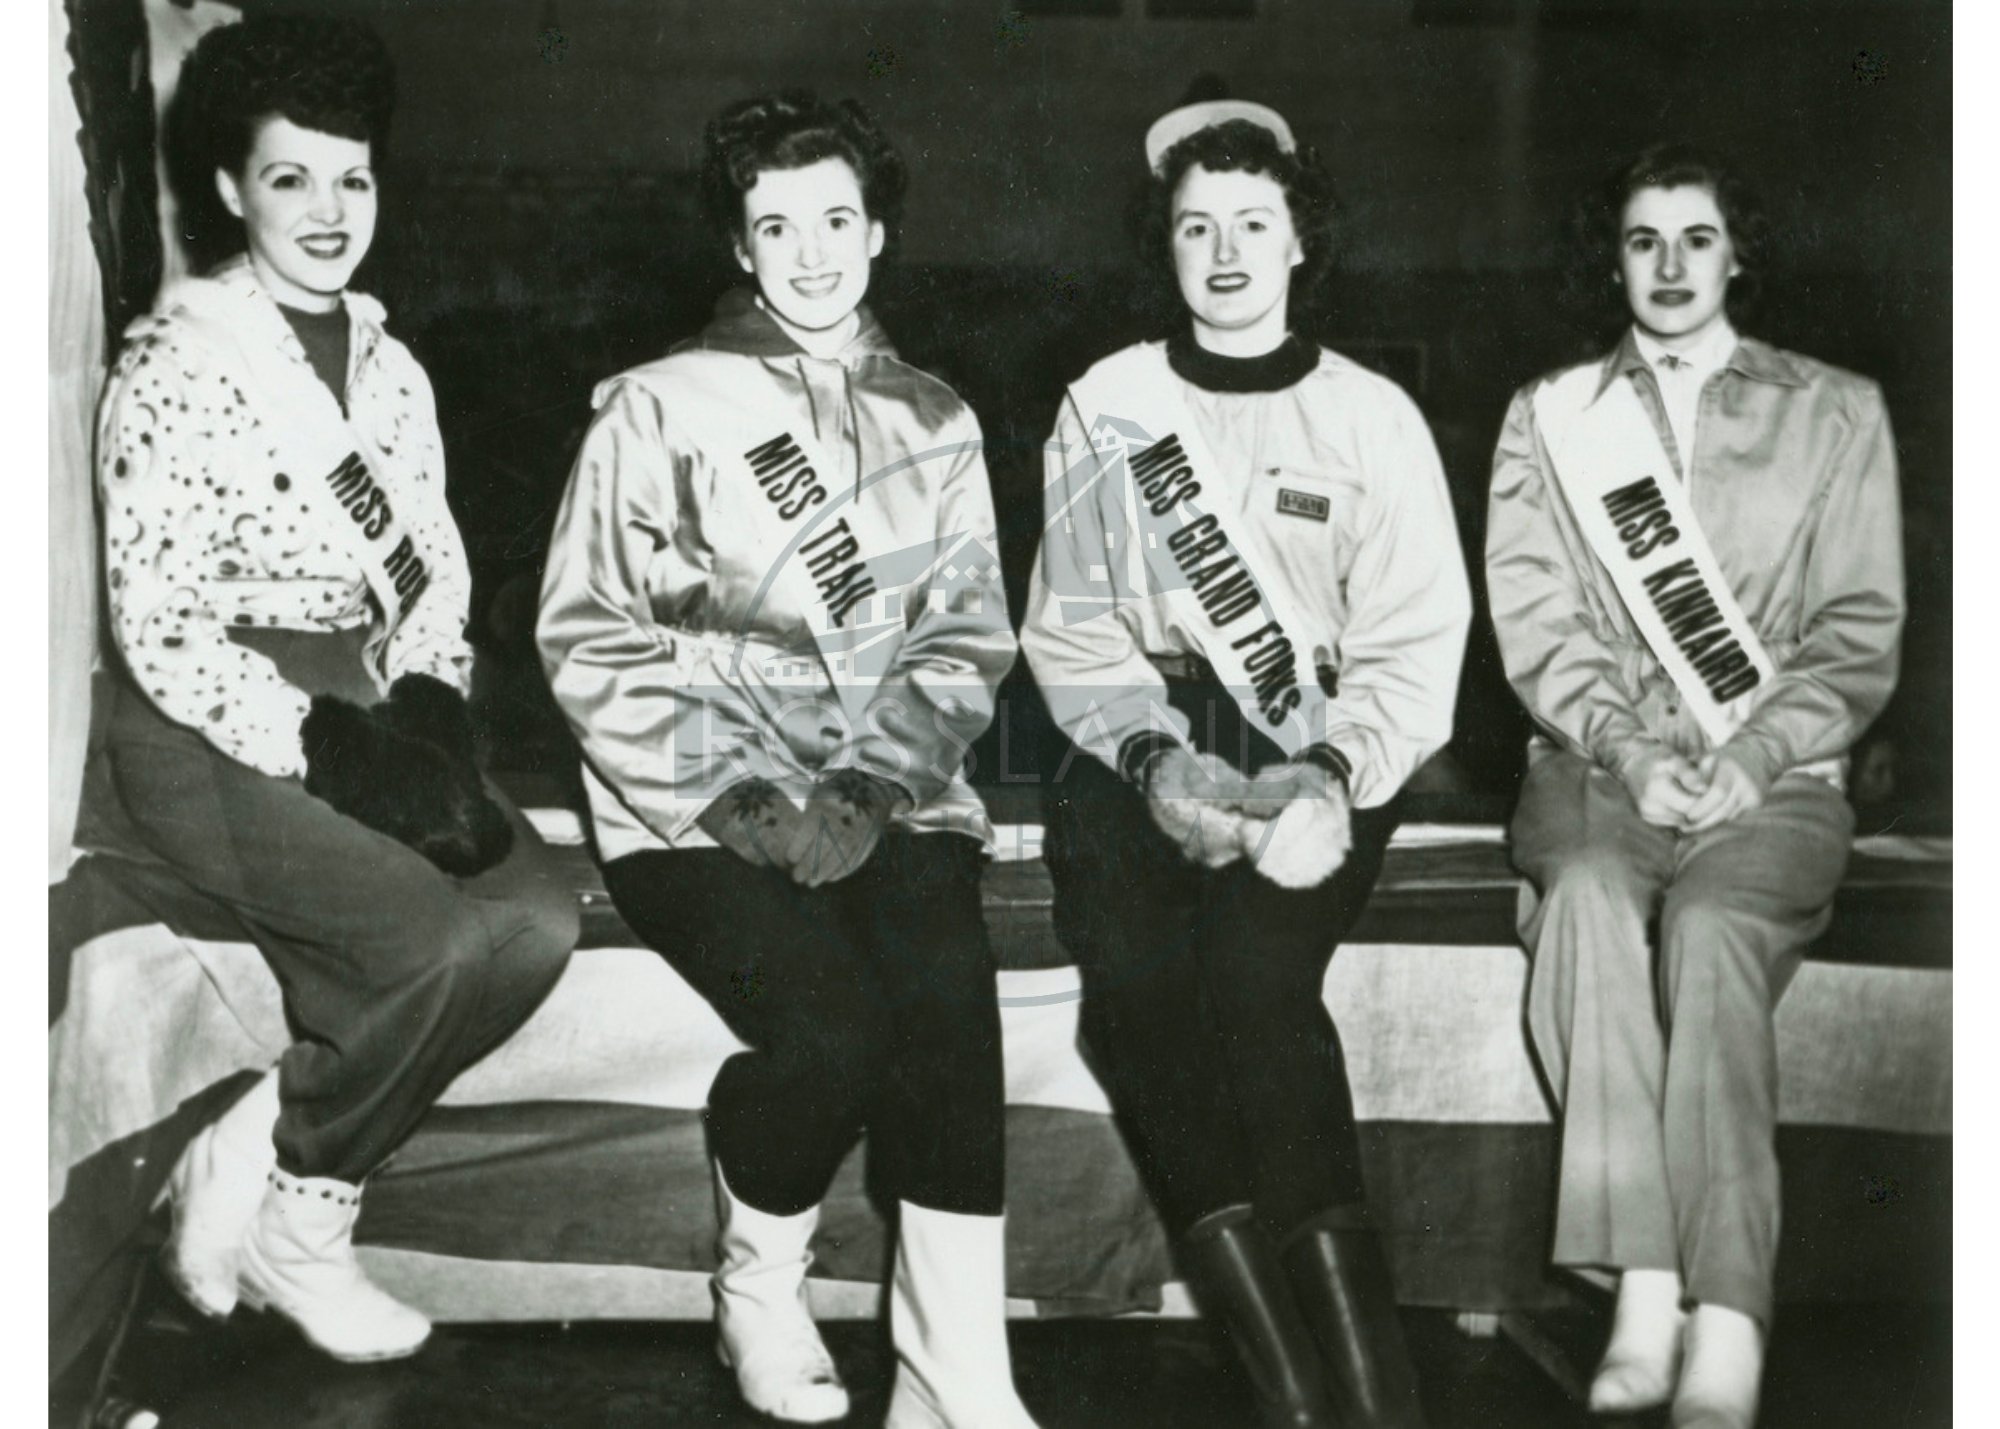   2358.0078 : Candidates for Snow Queen, February 1950.  Left to Right: Helen Lucas (Rossland), Leona Mann (Trail), Bernadette McDonald (Grand Forks), and Shirley Collinson (Kinnaird). 